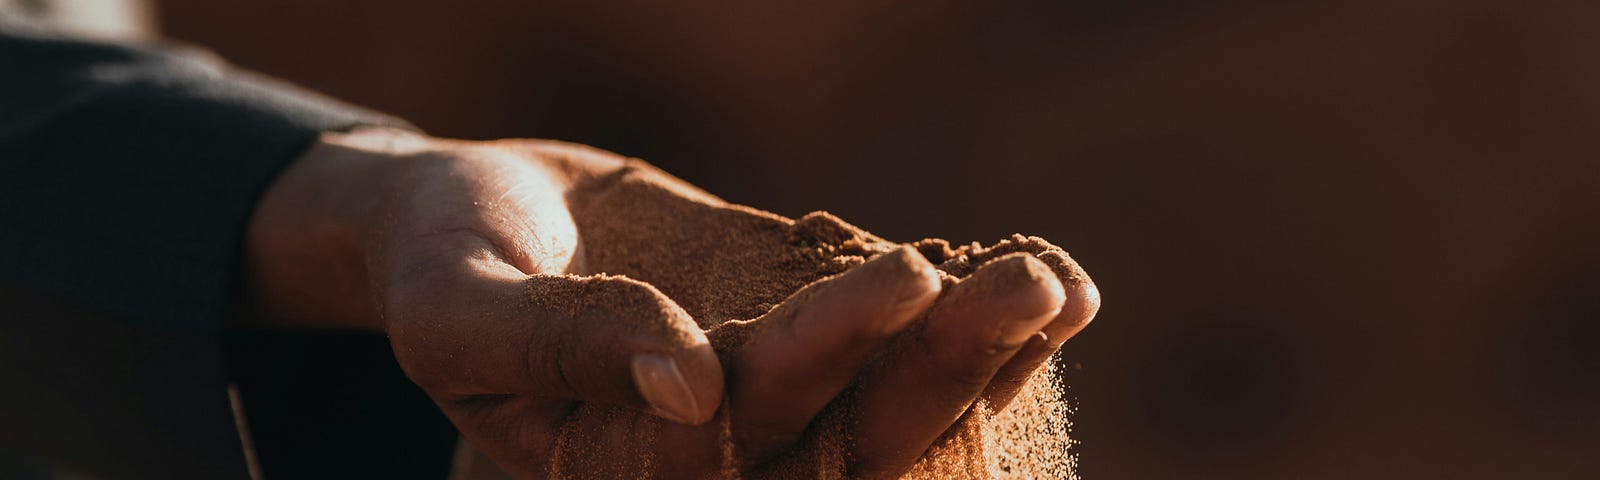 Here is an image of sand slipping through a man’s finger, representing time slipping by and our need to recognize the precious time given to each of us and use it wisely.